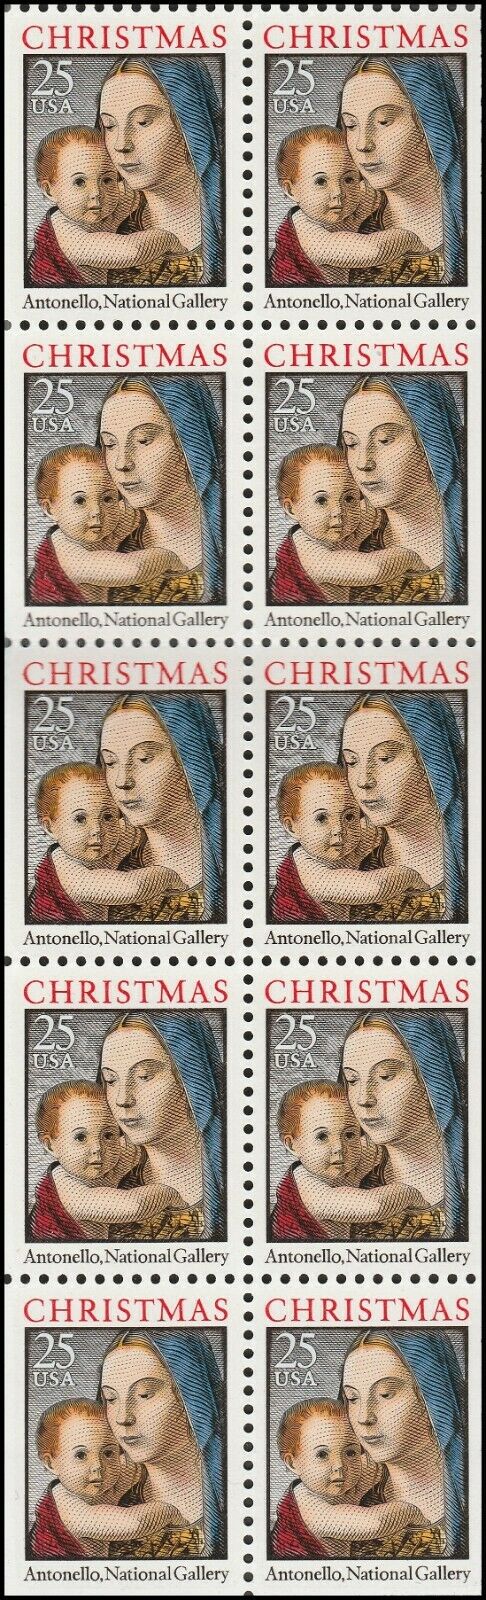 1990 Christmas Madonna By Antonello Stamp Booklet Pane Of 10 25c Postage Stamps - Sc# BK180, 2514 - CX774